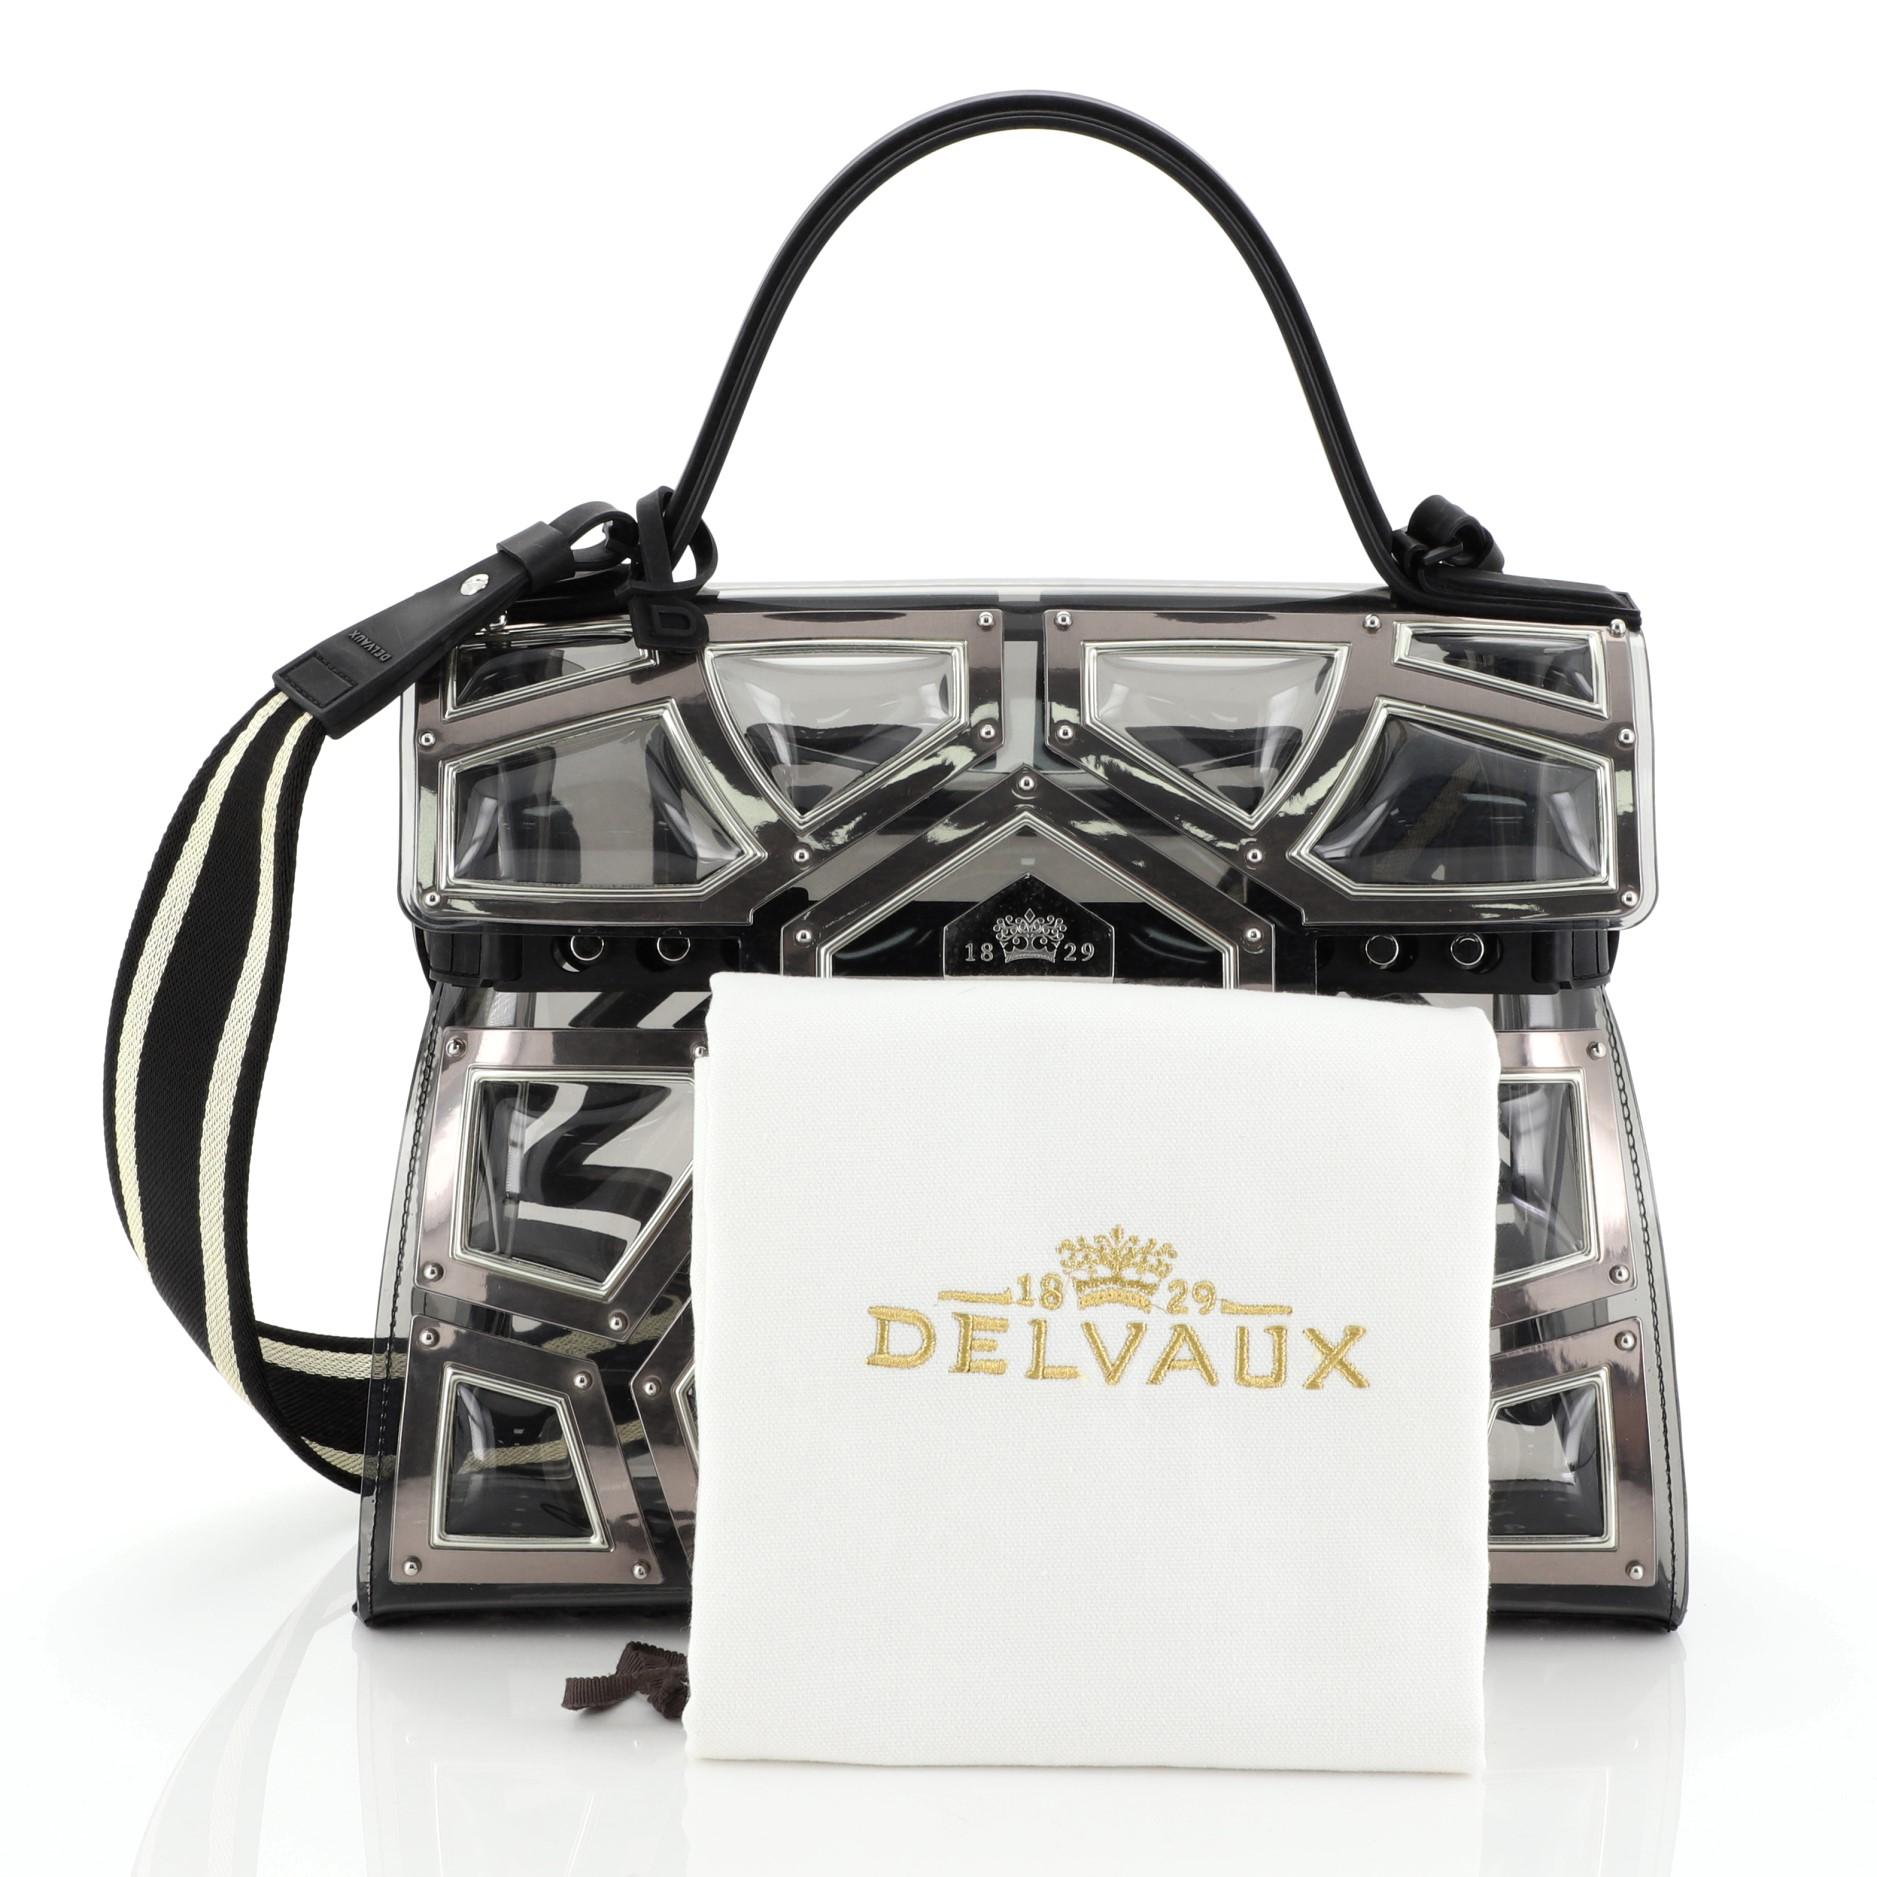 This Delvaux Gladiator Tempete Top Handle Bag Metal Embellished Vinyl GM, crafted in black vinyl framed with metal edging, features a leather top handle, spiked base and silver and gunmetal-tone hardware. Its push-lock closure opens to a black vinyl